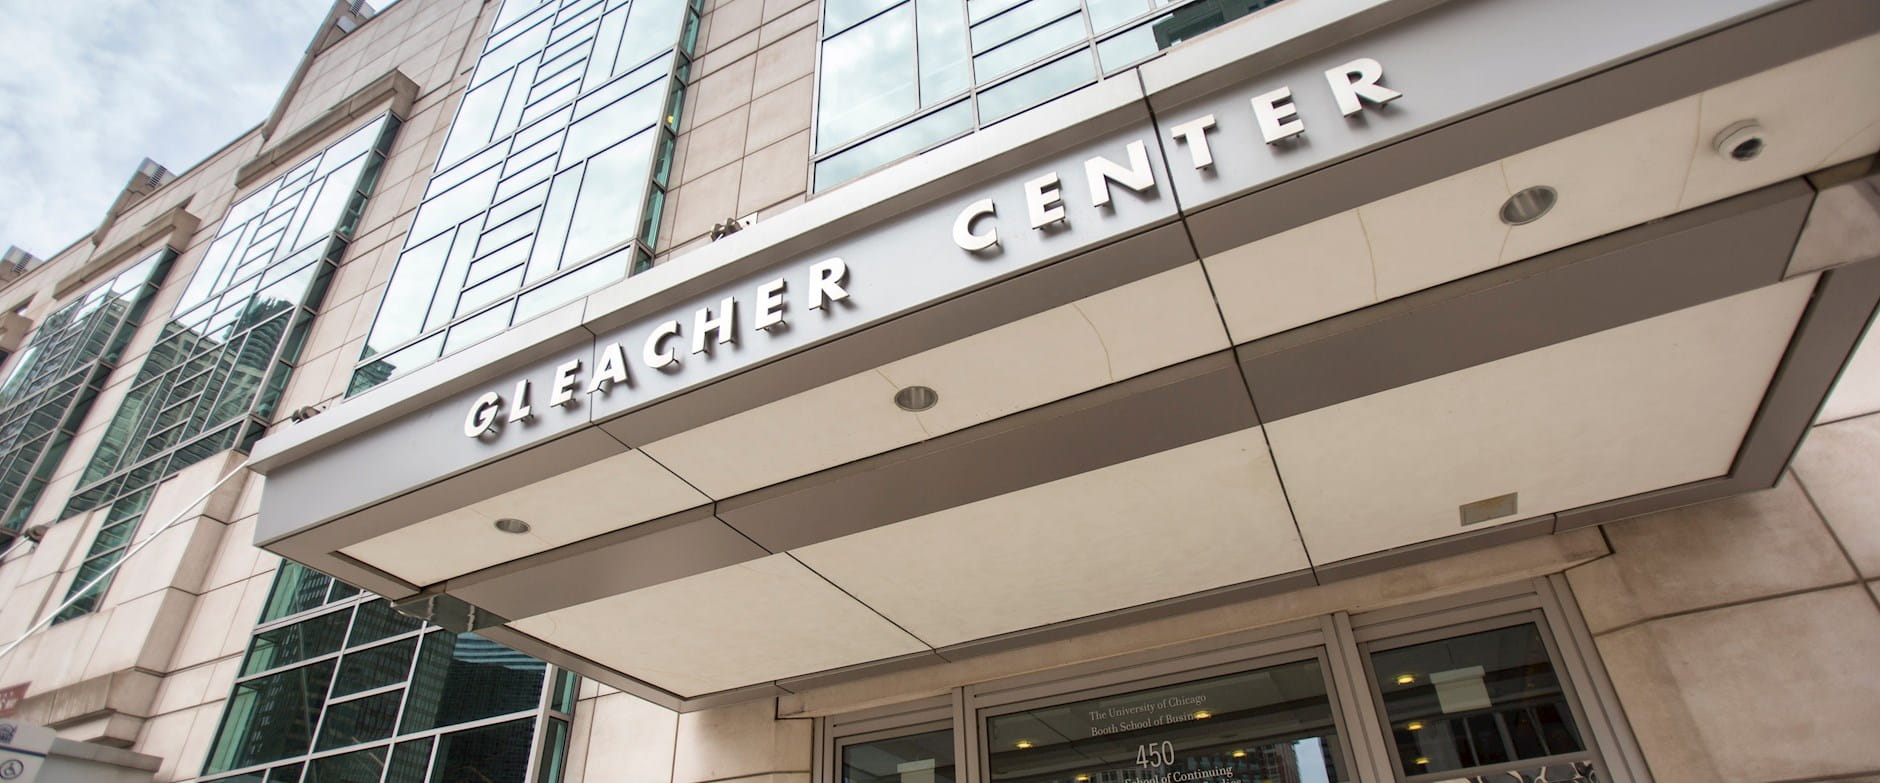  Exterior view of the Chicago Booth Gleacher Center